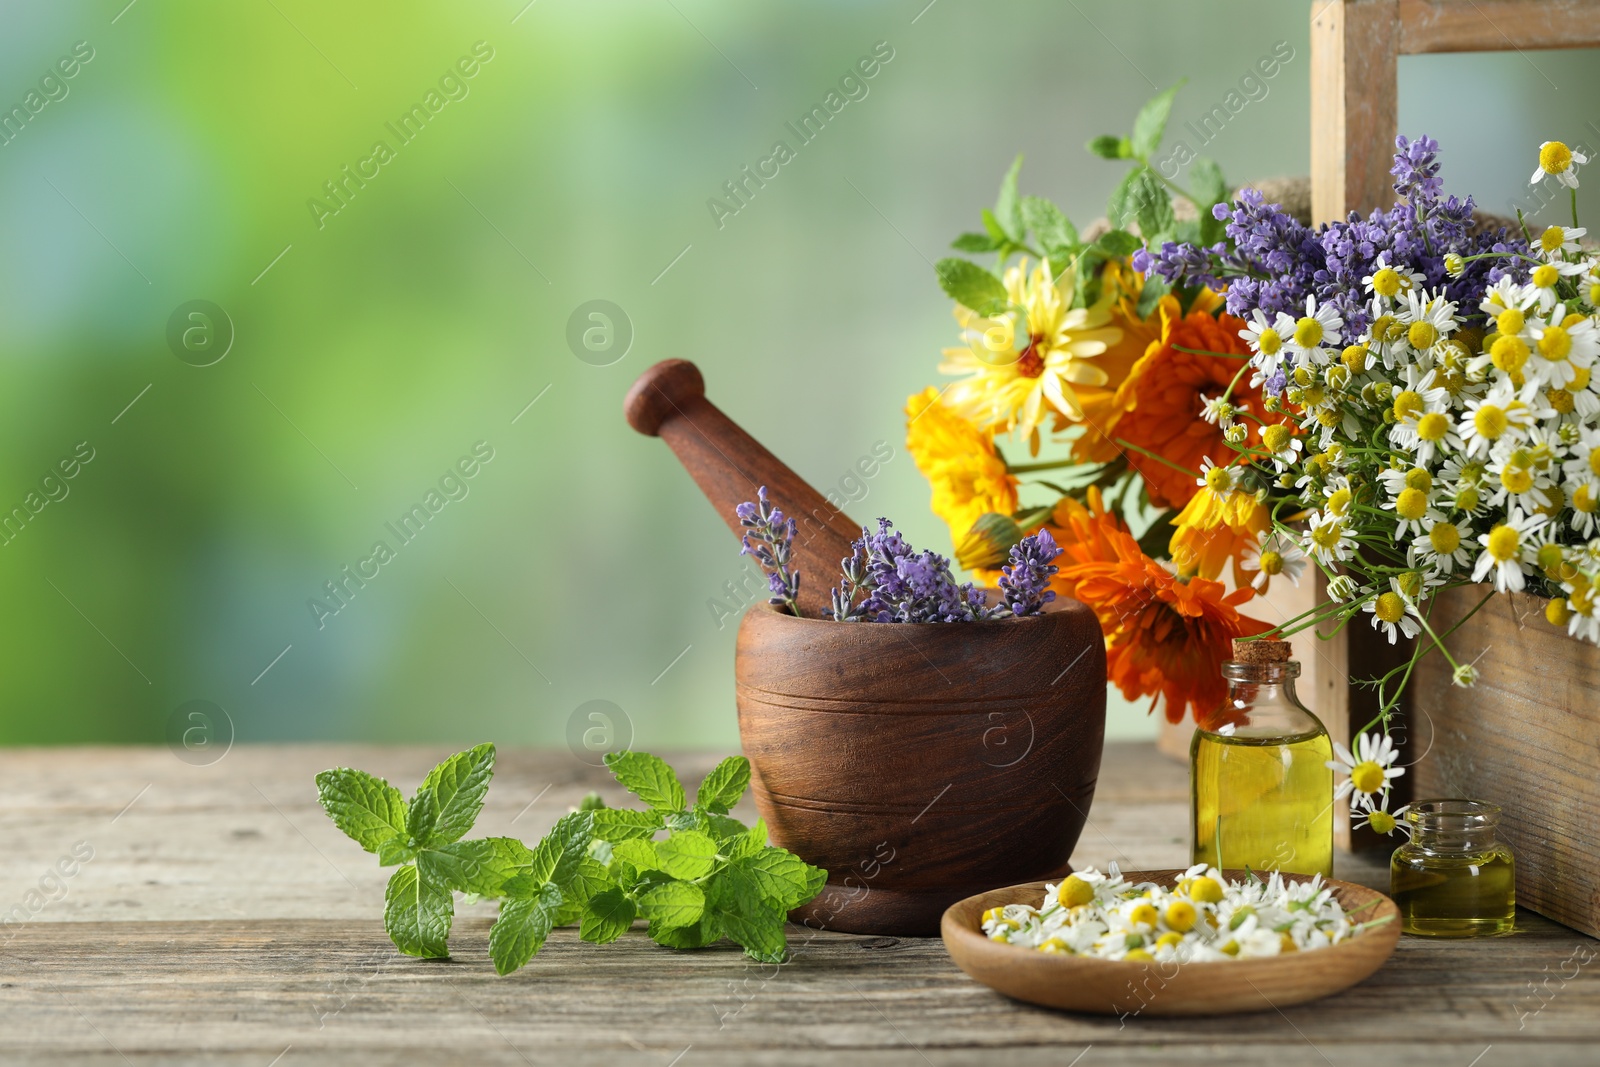 Photo of Different flowers, mint, bottles of essential oils, mortar and pestle on wooden table outdoors. Space for text